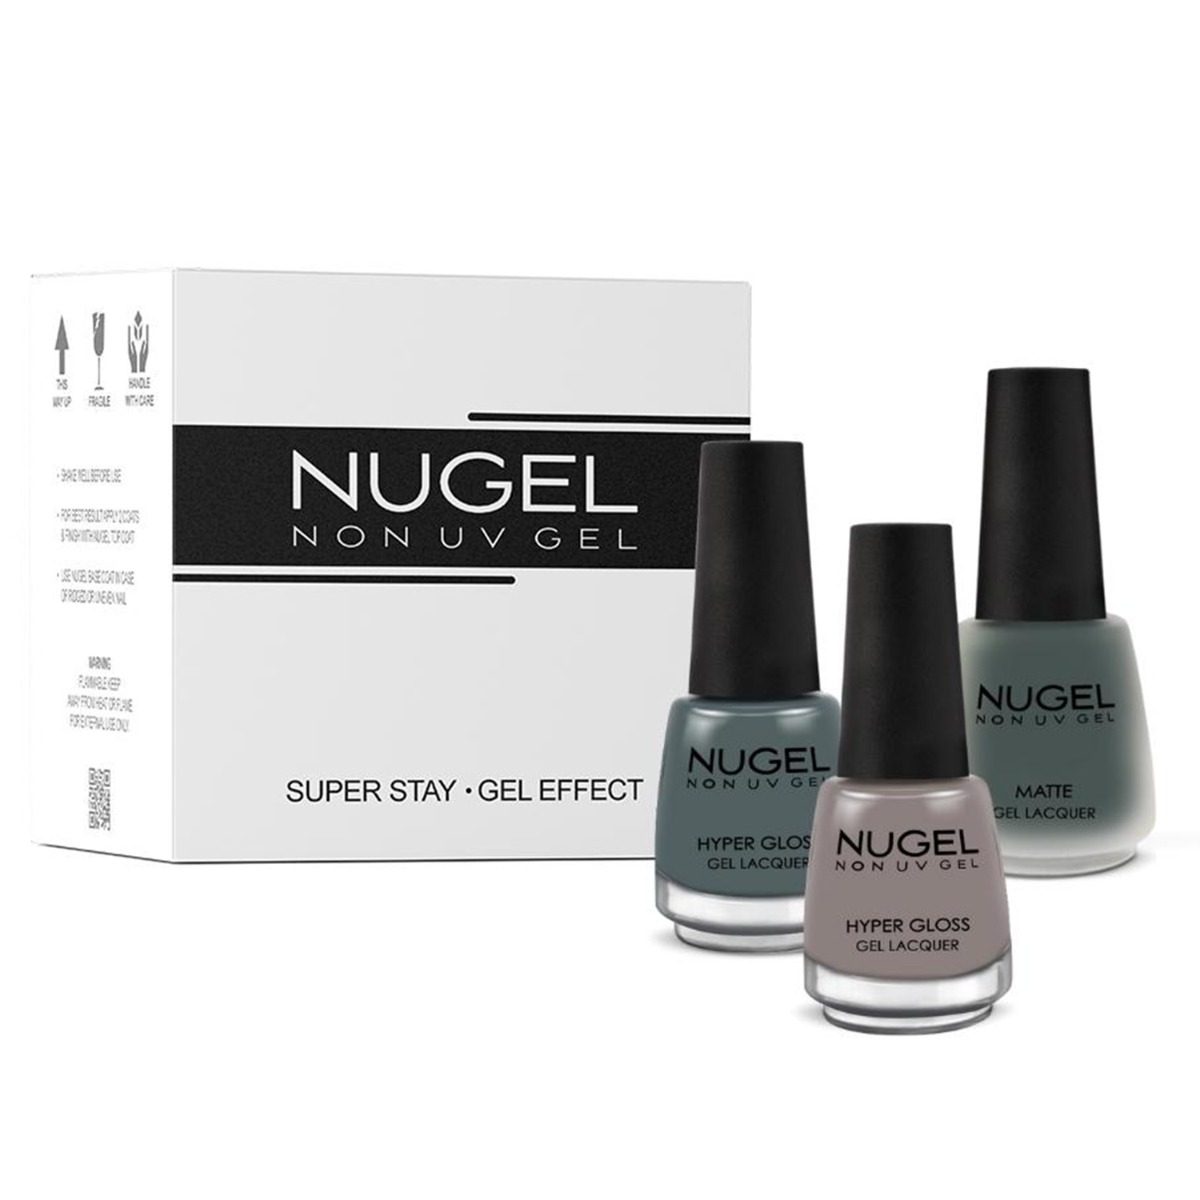 NUGEL 3 In 1 Combo 04 Quick Dry Gel Finish Nail Paint - Vintage, Nail Kit, 39ml